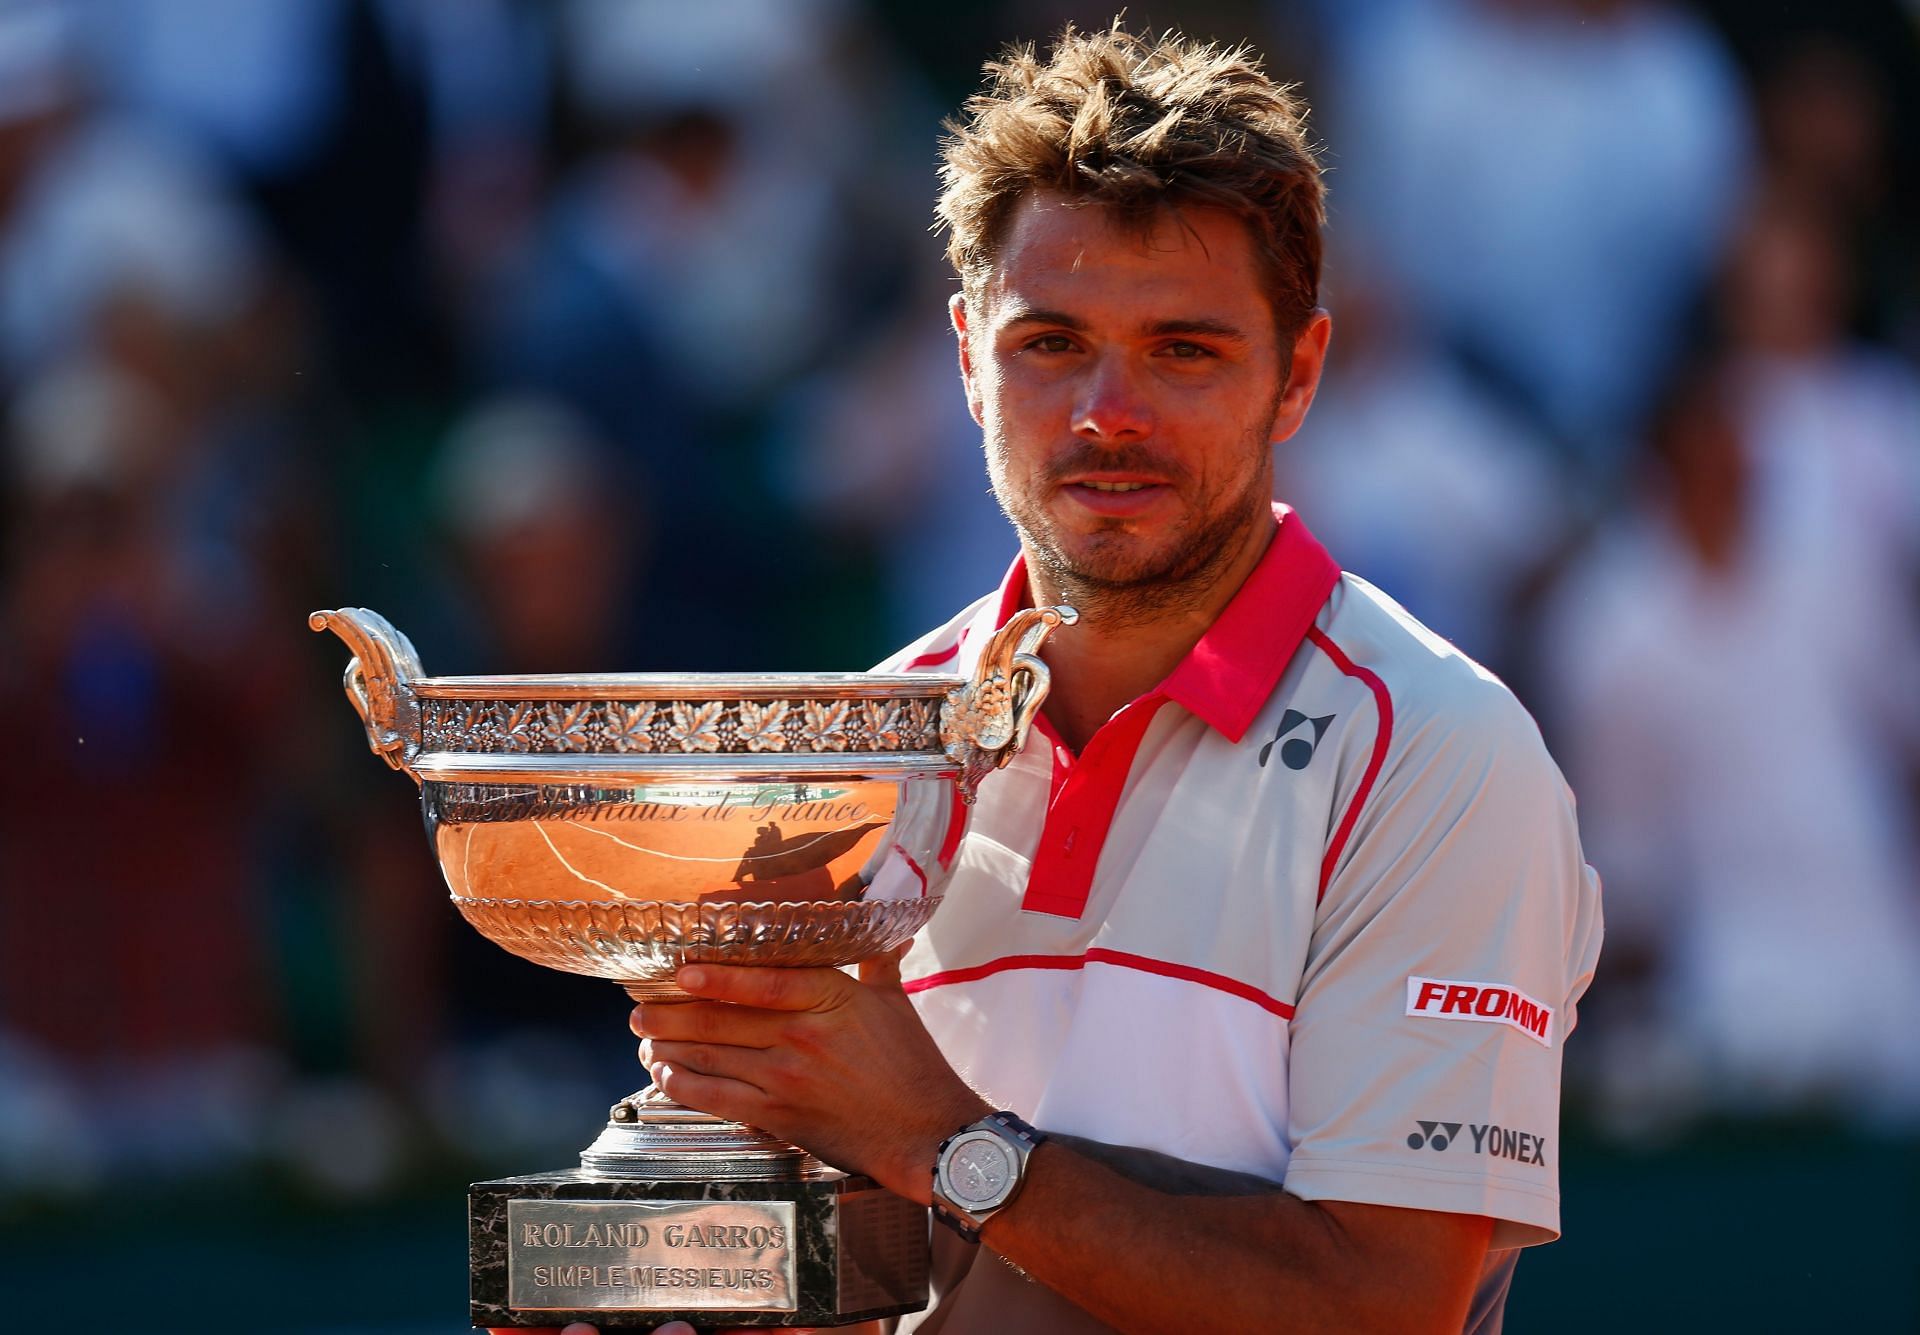 2015 French Open - Day Fifteen